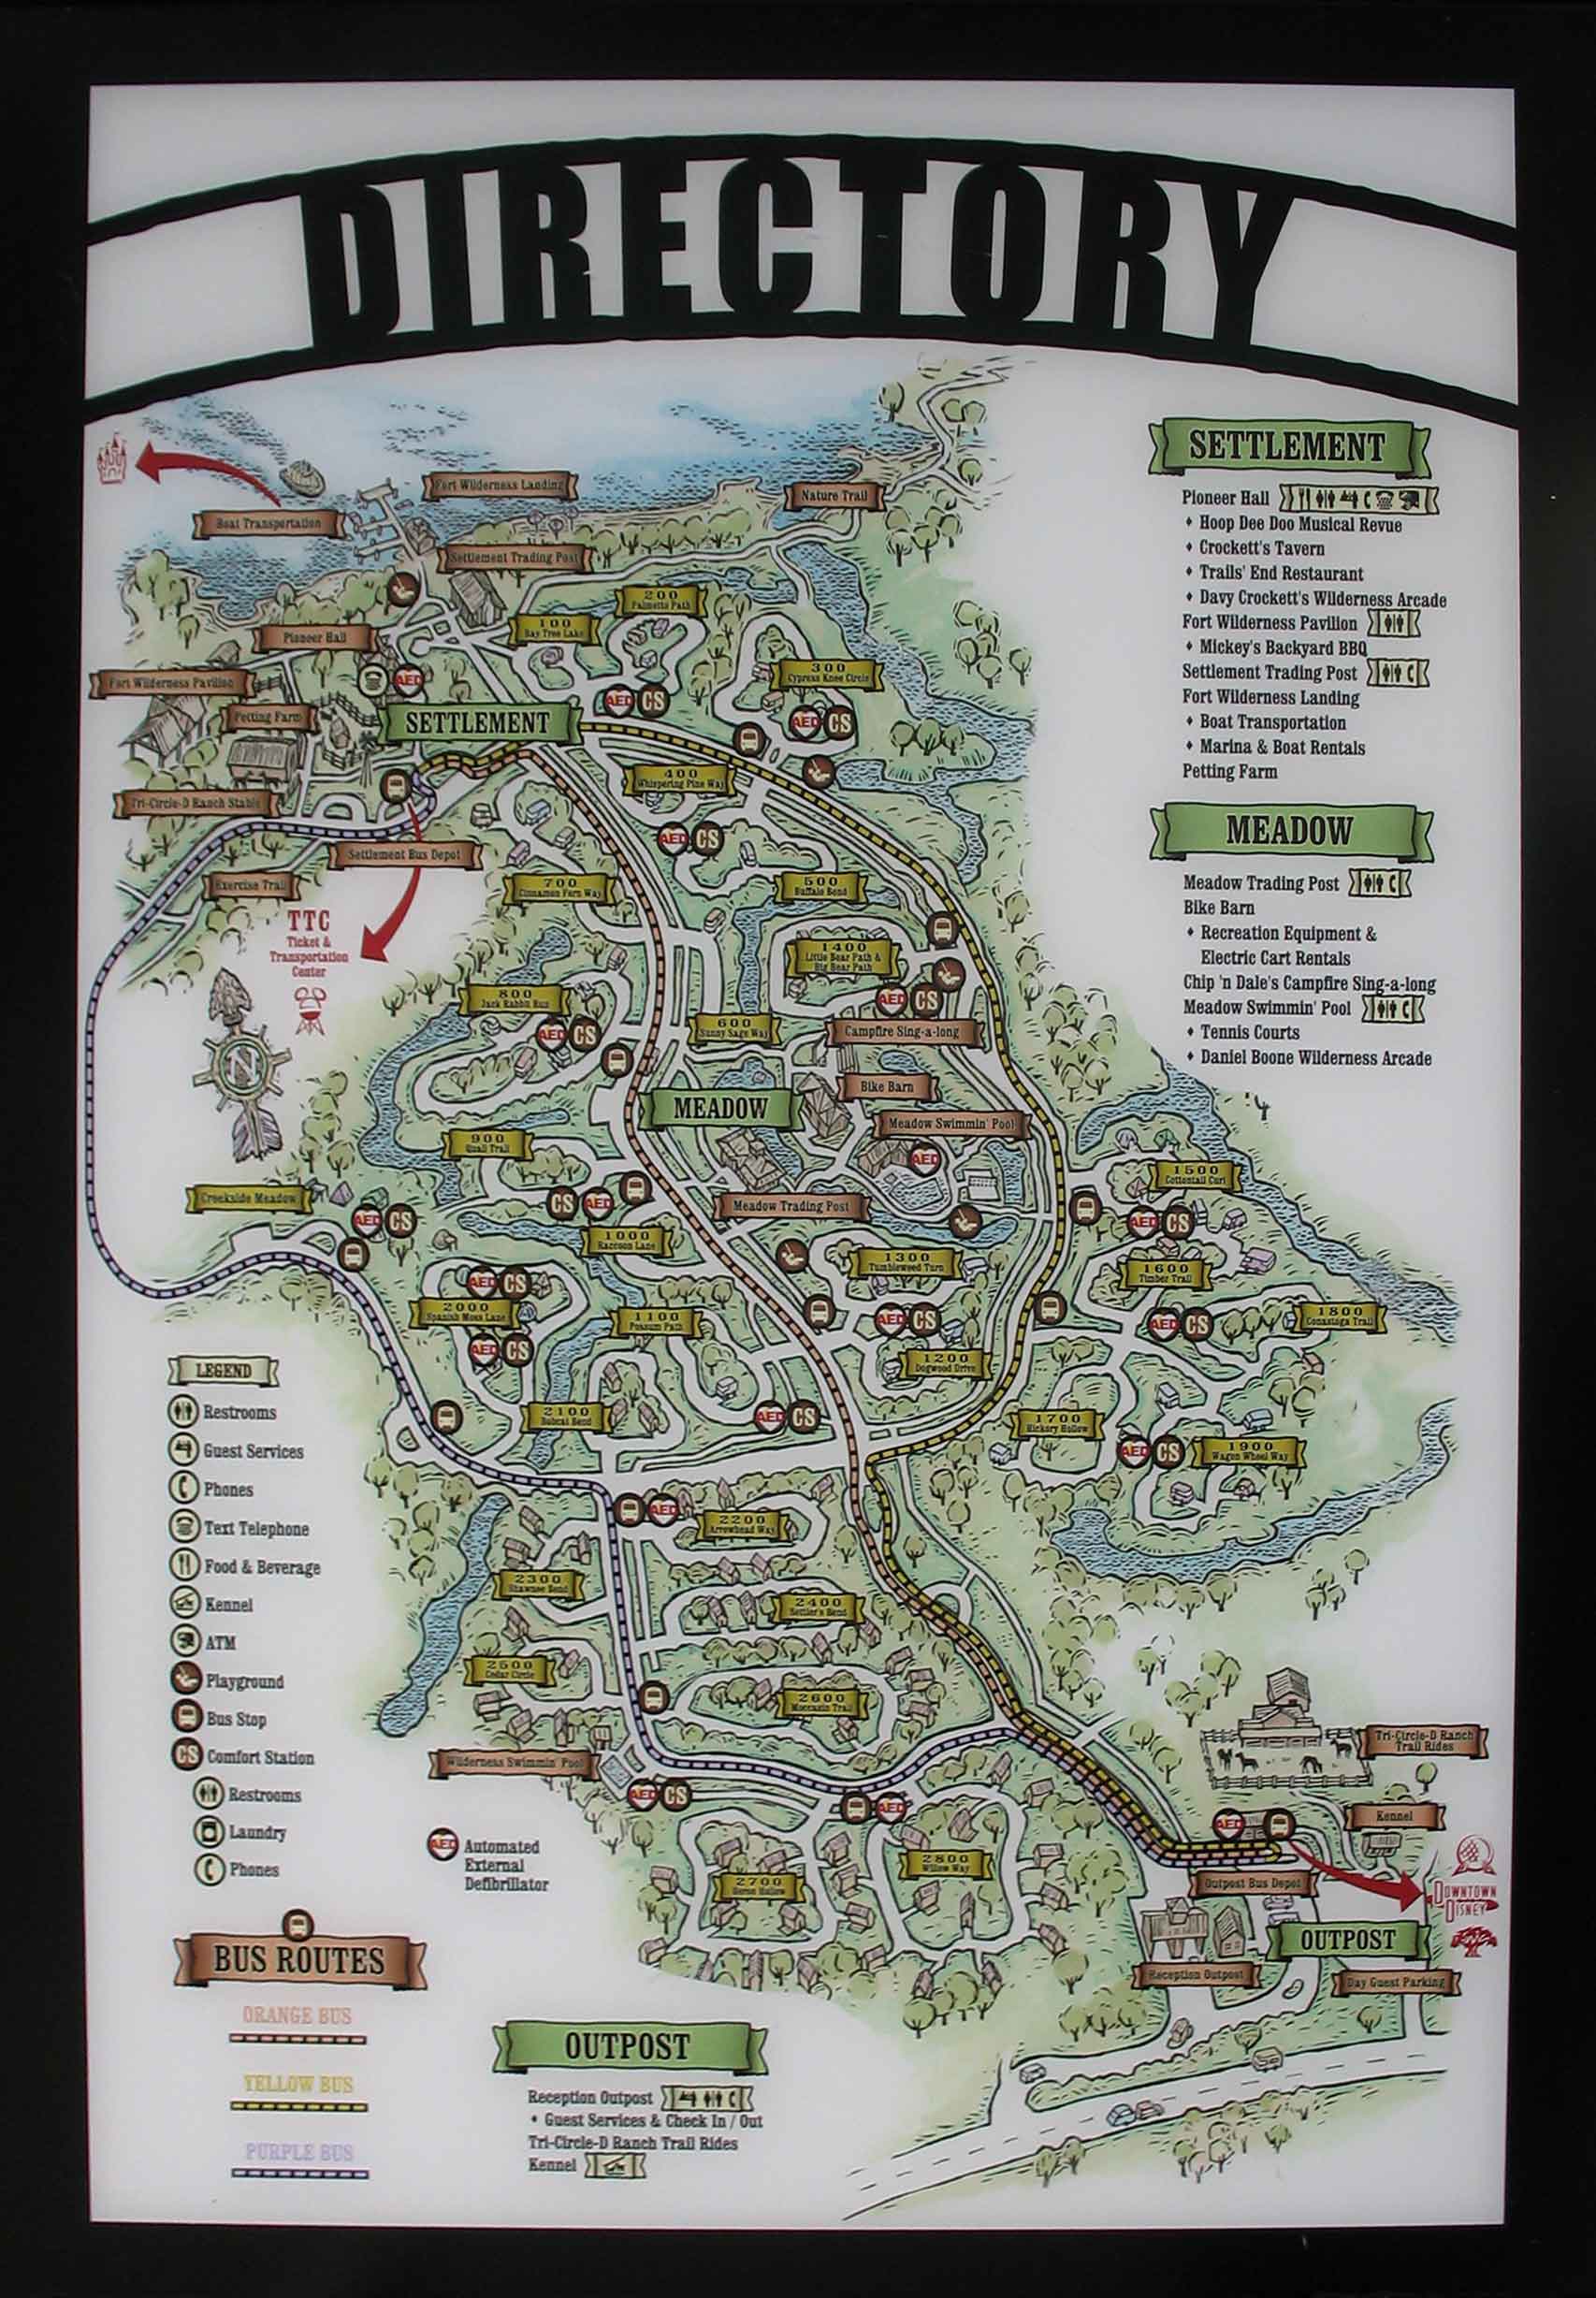 Fort Wilderness Directory and Map